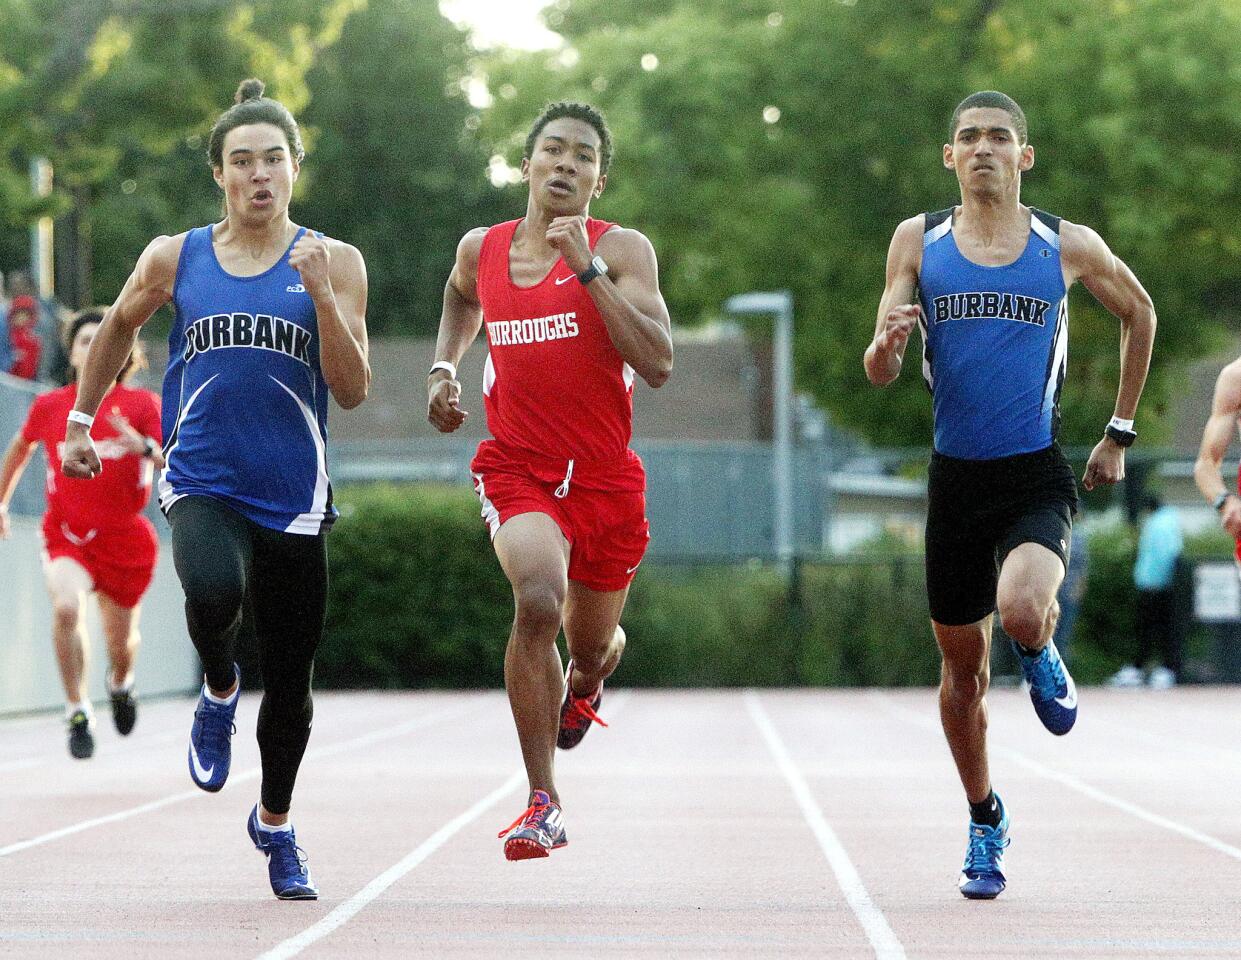 Burbank's Ian Miller, Burroughs' Caleb Black and Burbank's Bryan David run together to the finish of the boys' 200 in a Pacific League dual track meet between Burroughs and Burbank at Memorial Field in Burbank on Thursday, April 11, 2019.